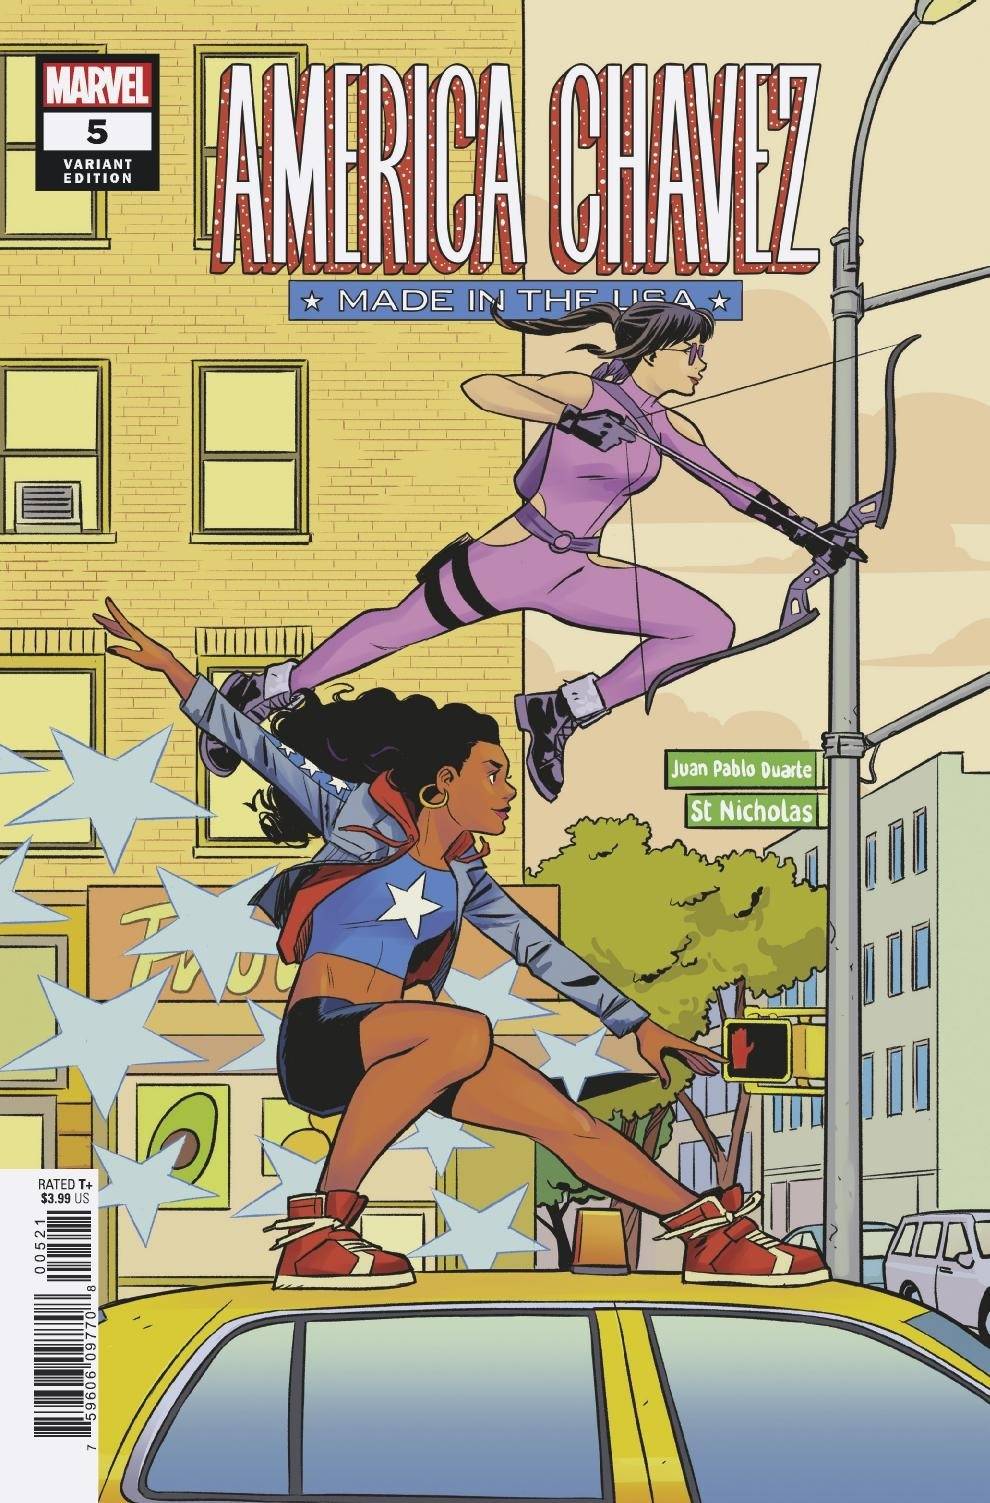 America Chavez Made In USA #5 Bustos Variant (Of 5)